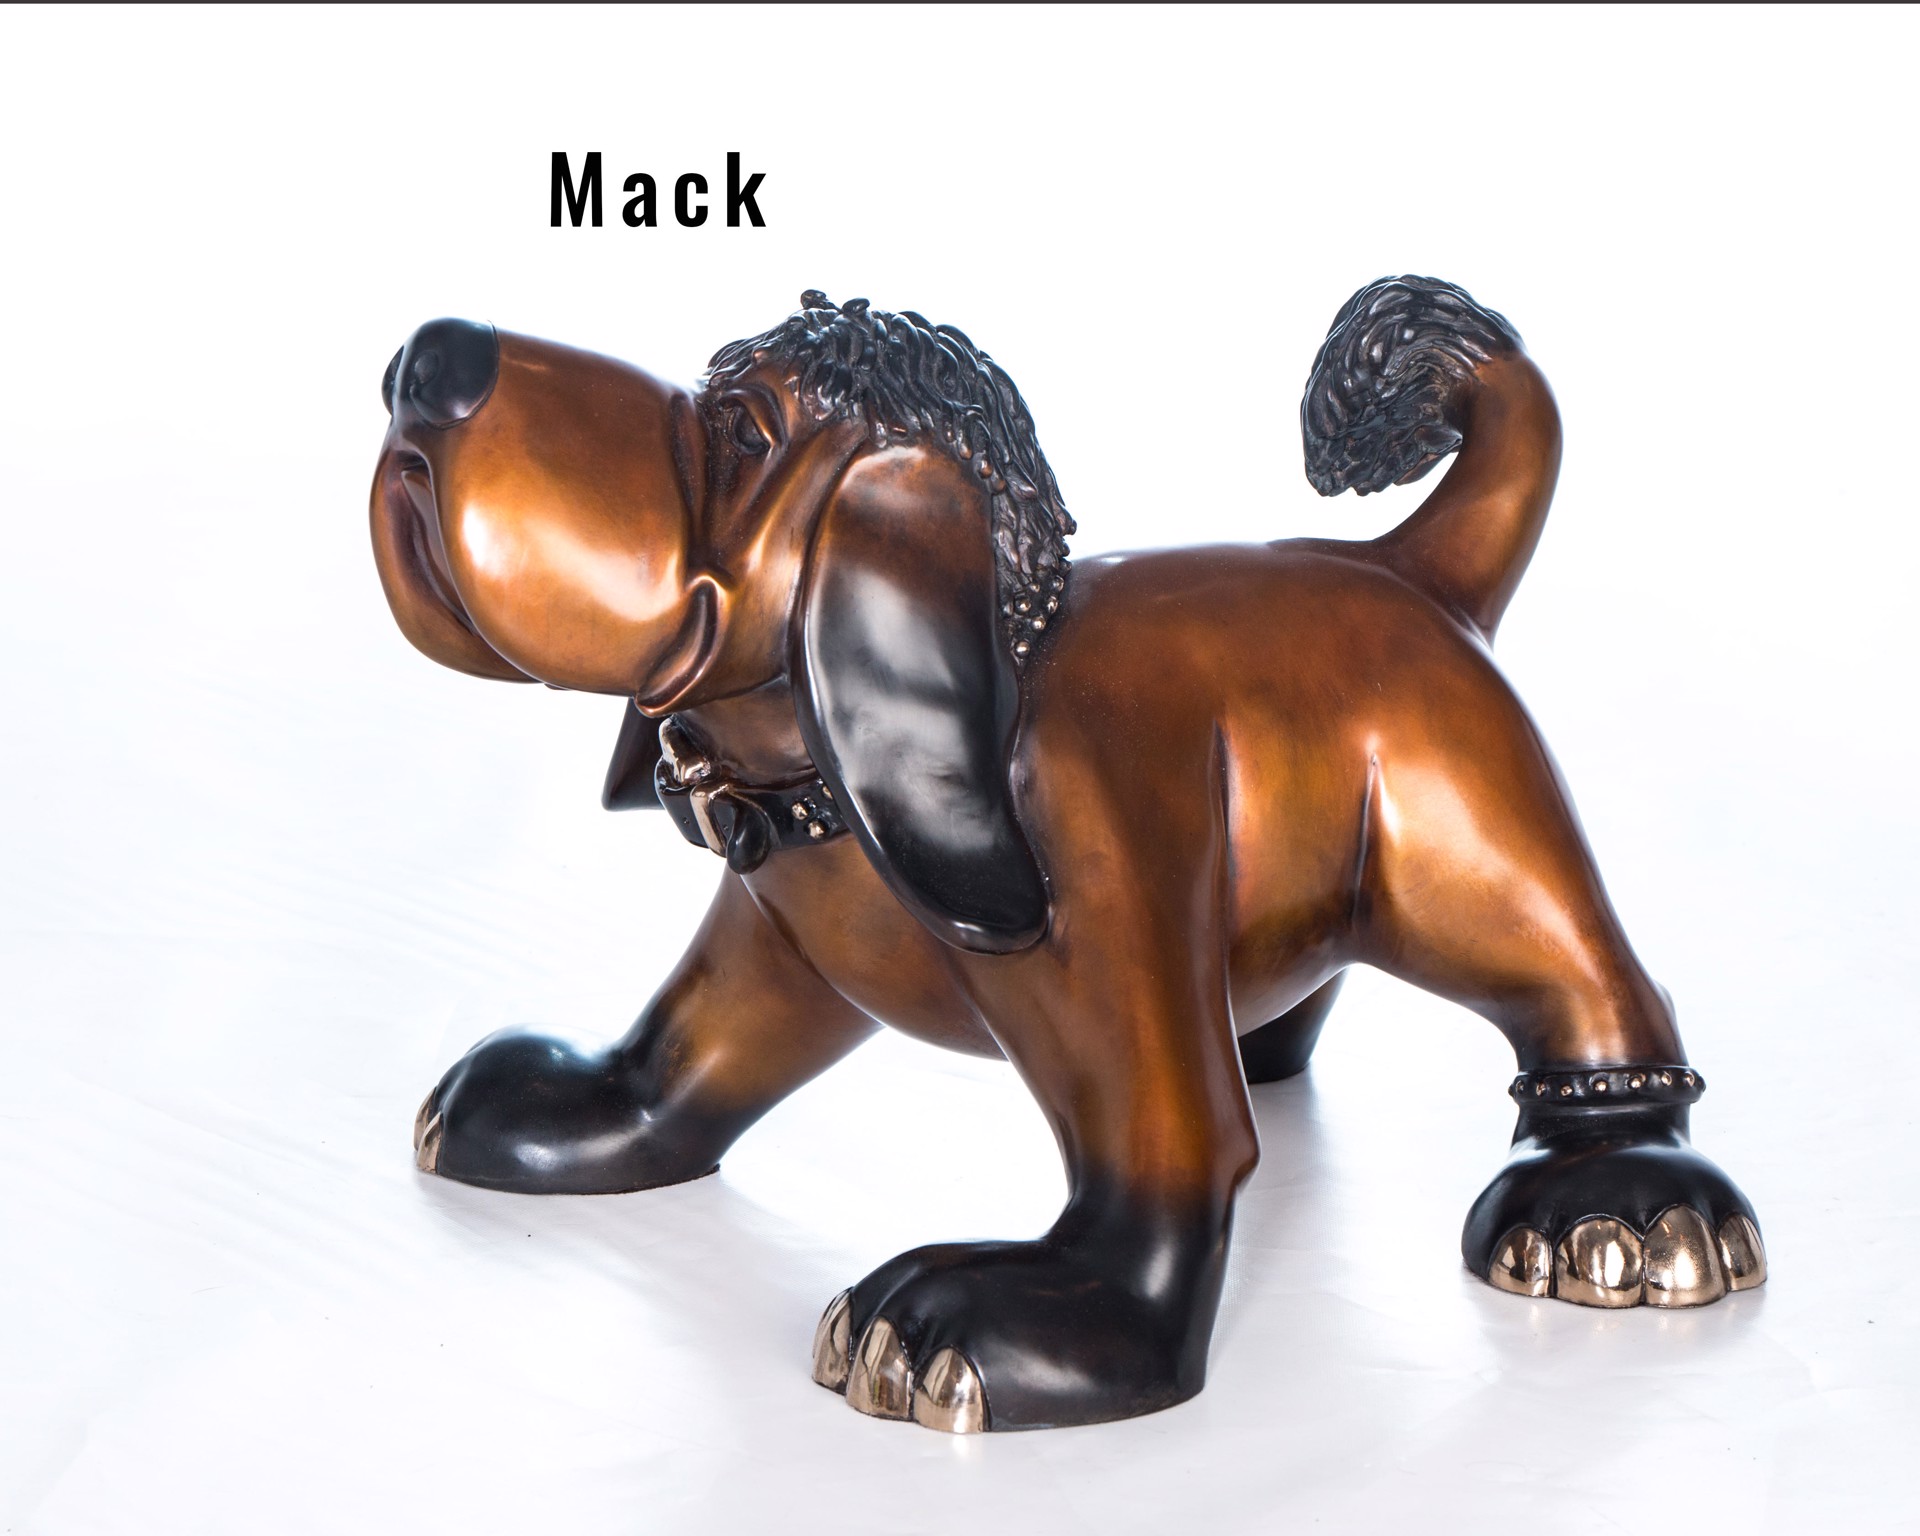 Mack by Marty Goldstein